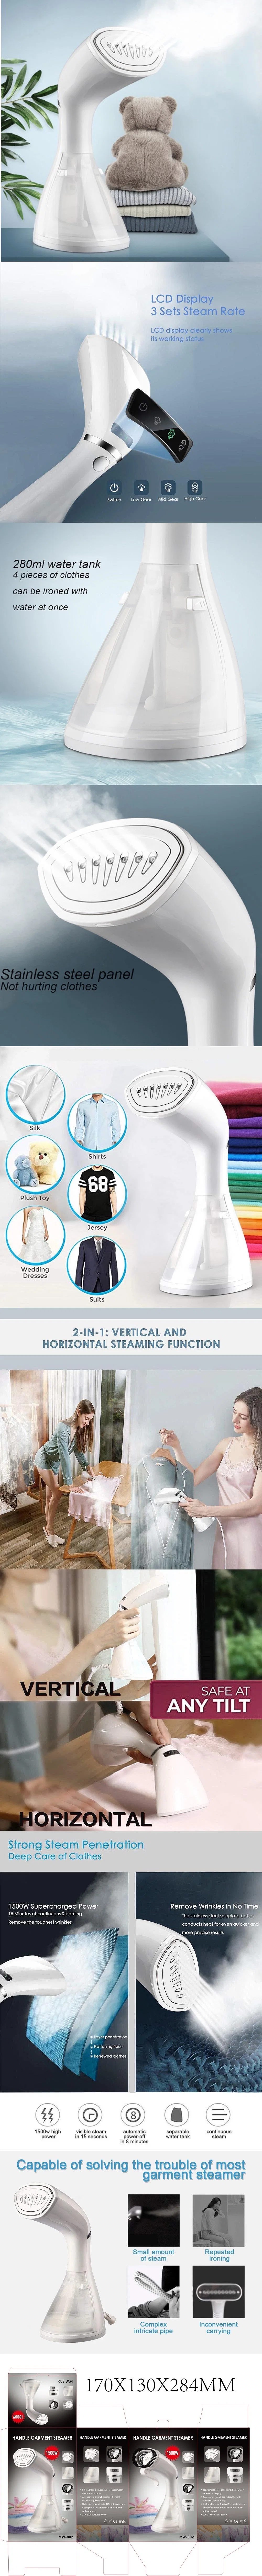 New Handheld Steam Iron for Garment Fast-Heat Garment Steamer Iron Portable for Home with 3 Levels Steam Rate